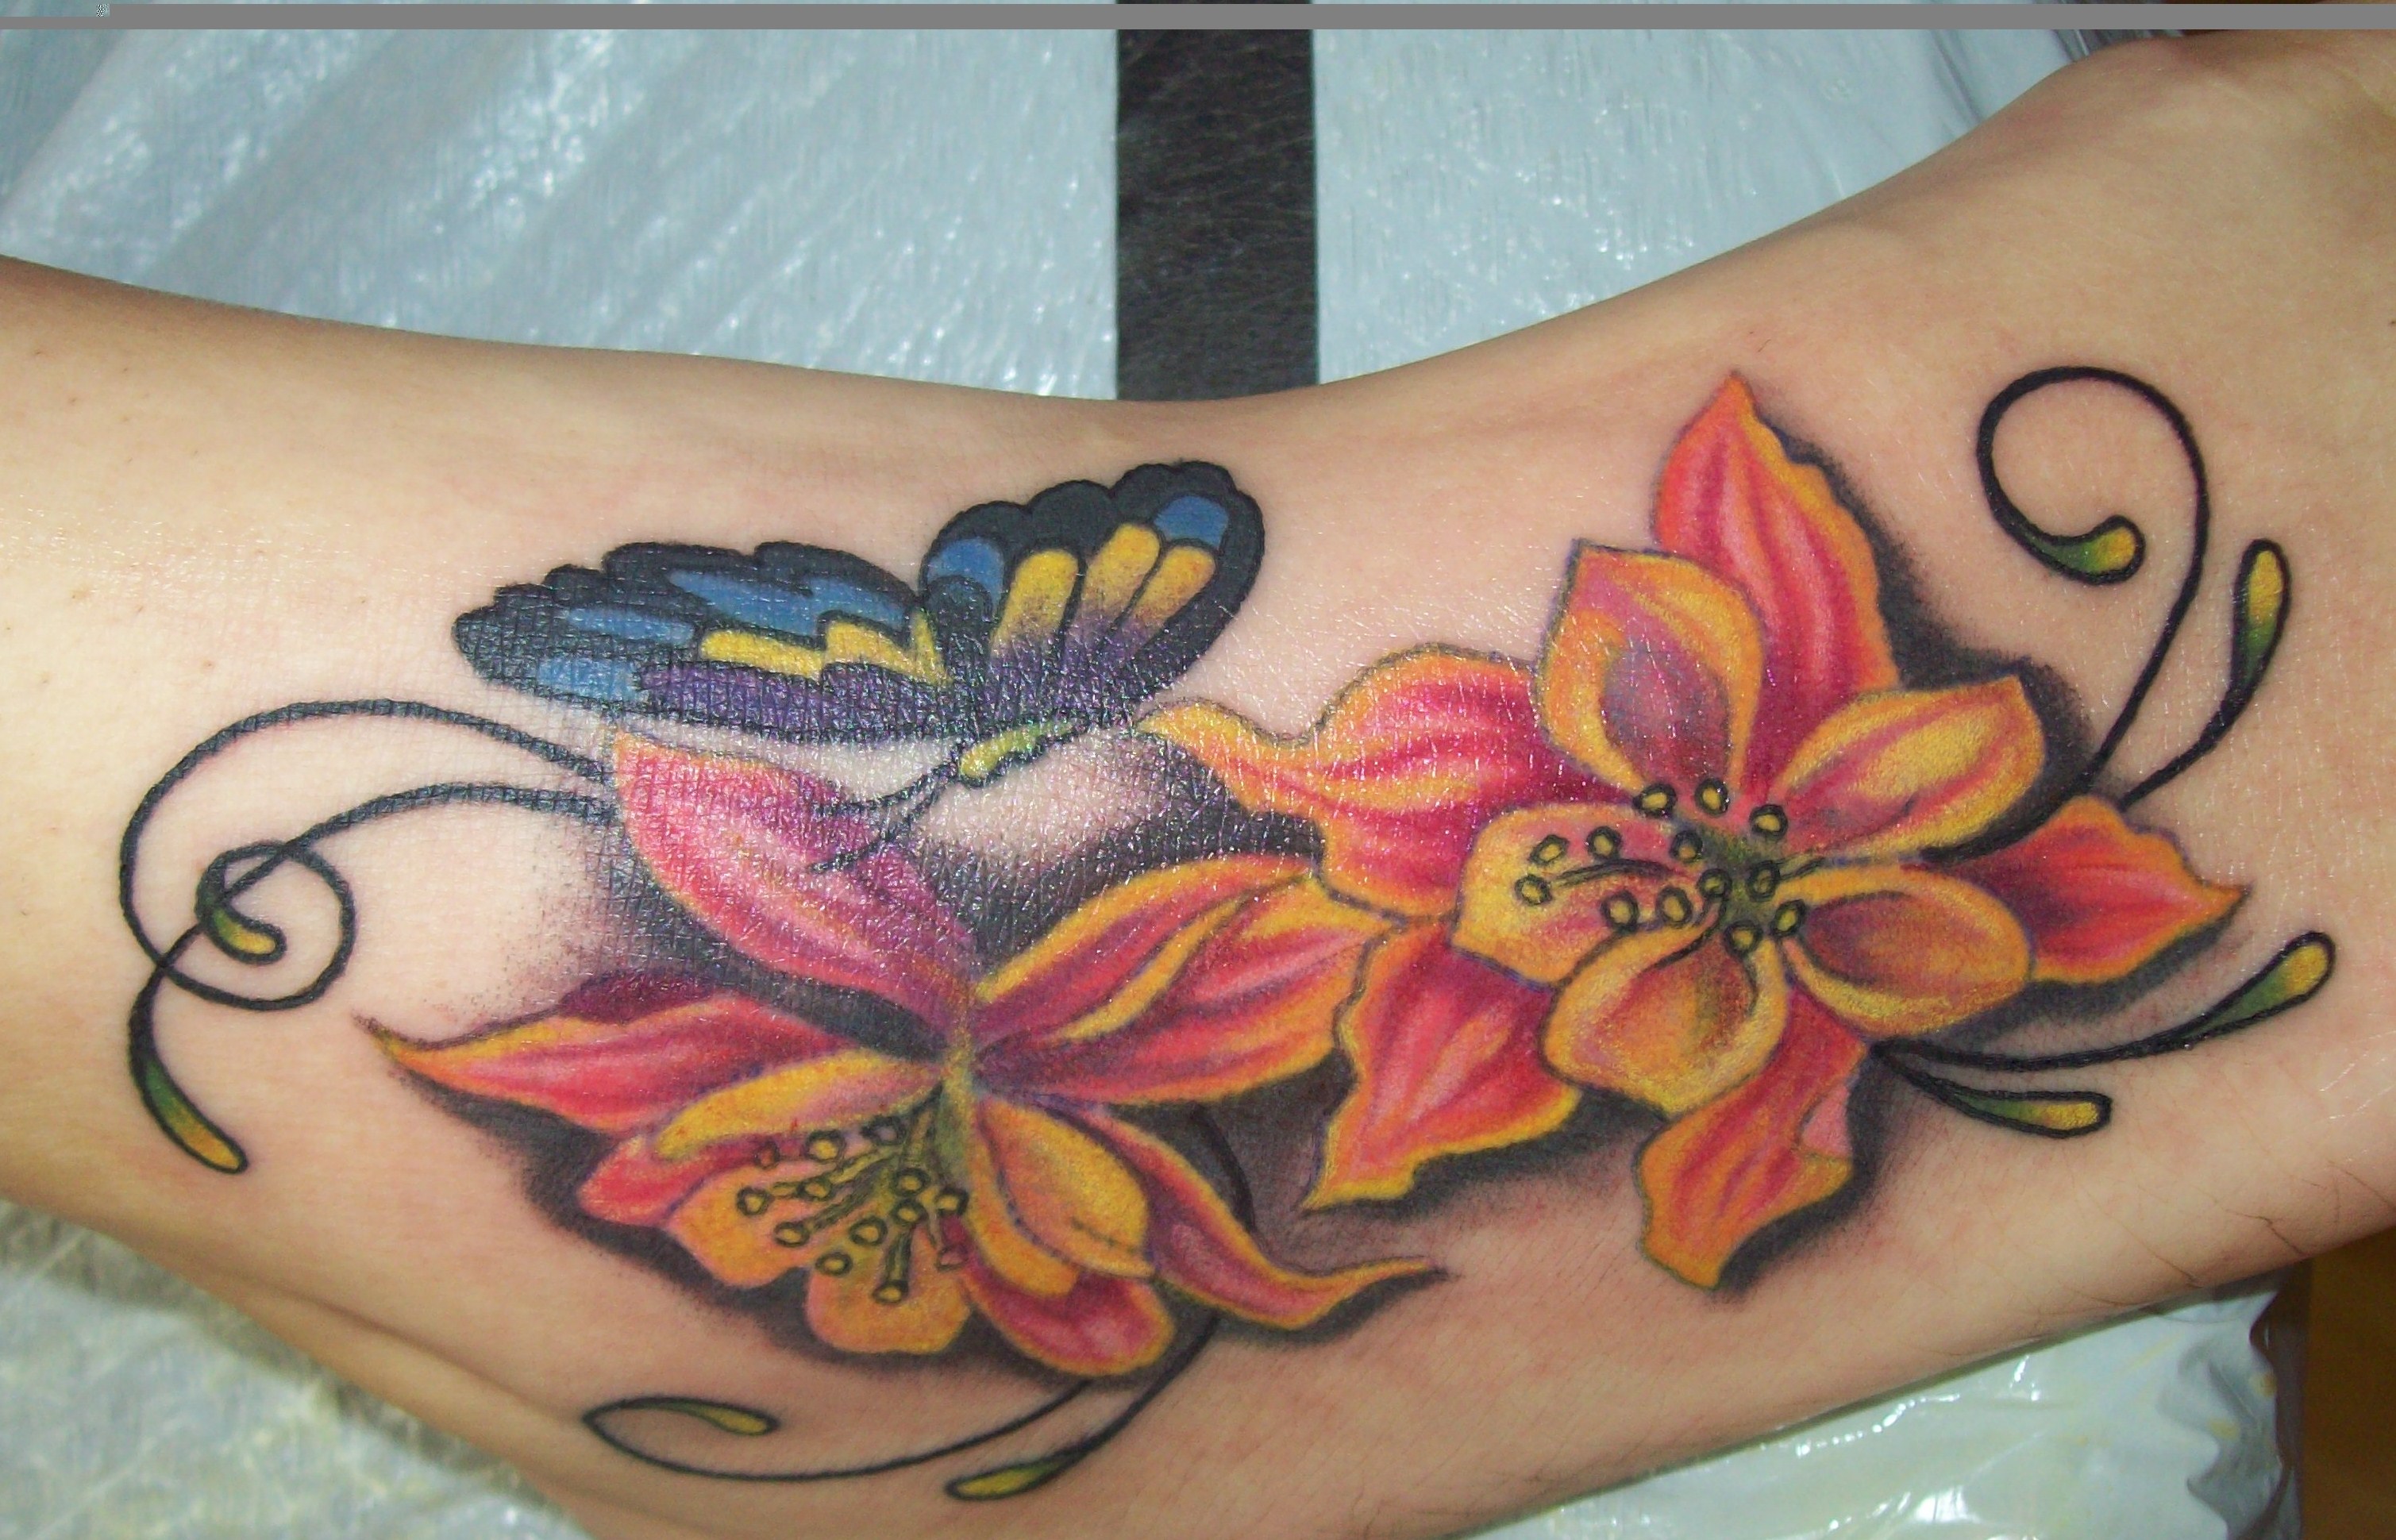 Tattoo i did in the past month, floweres on foot. no outline